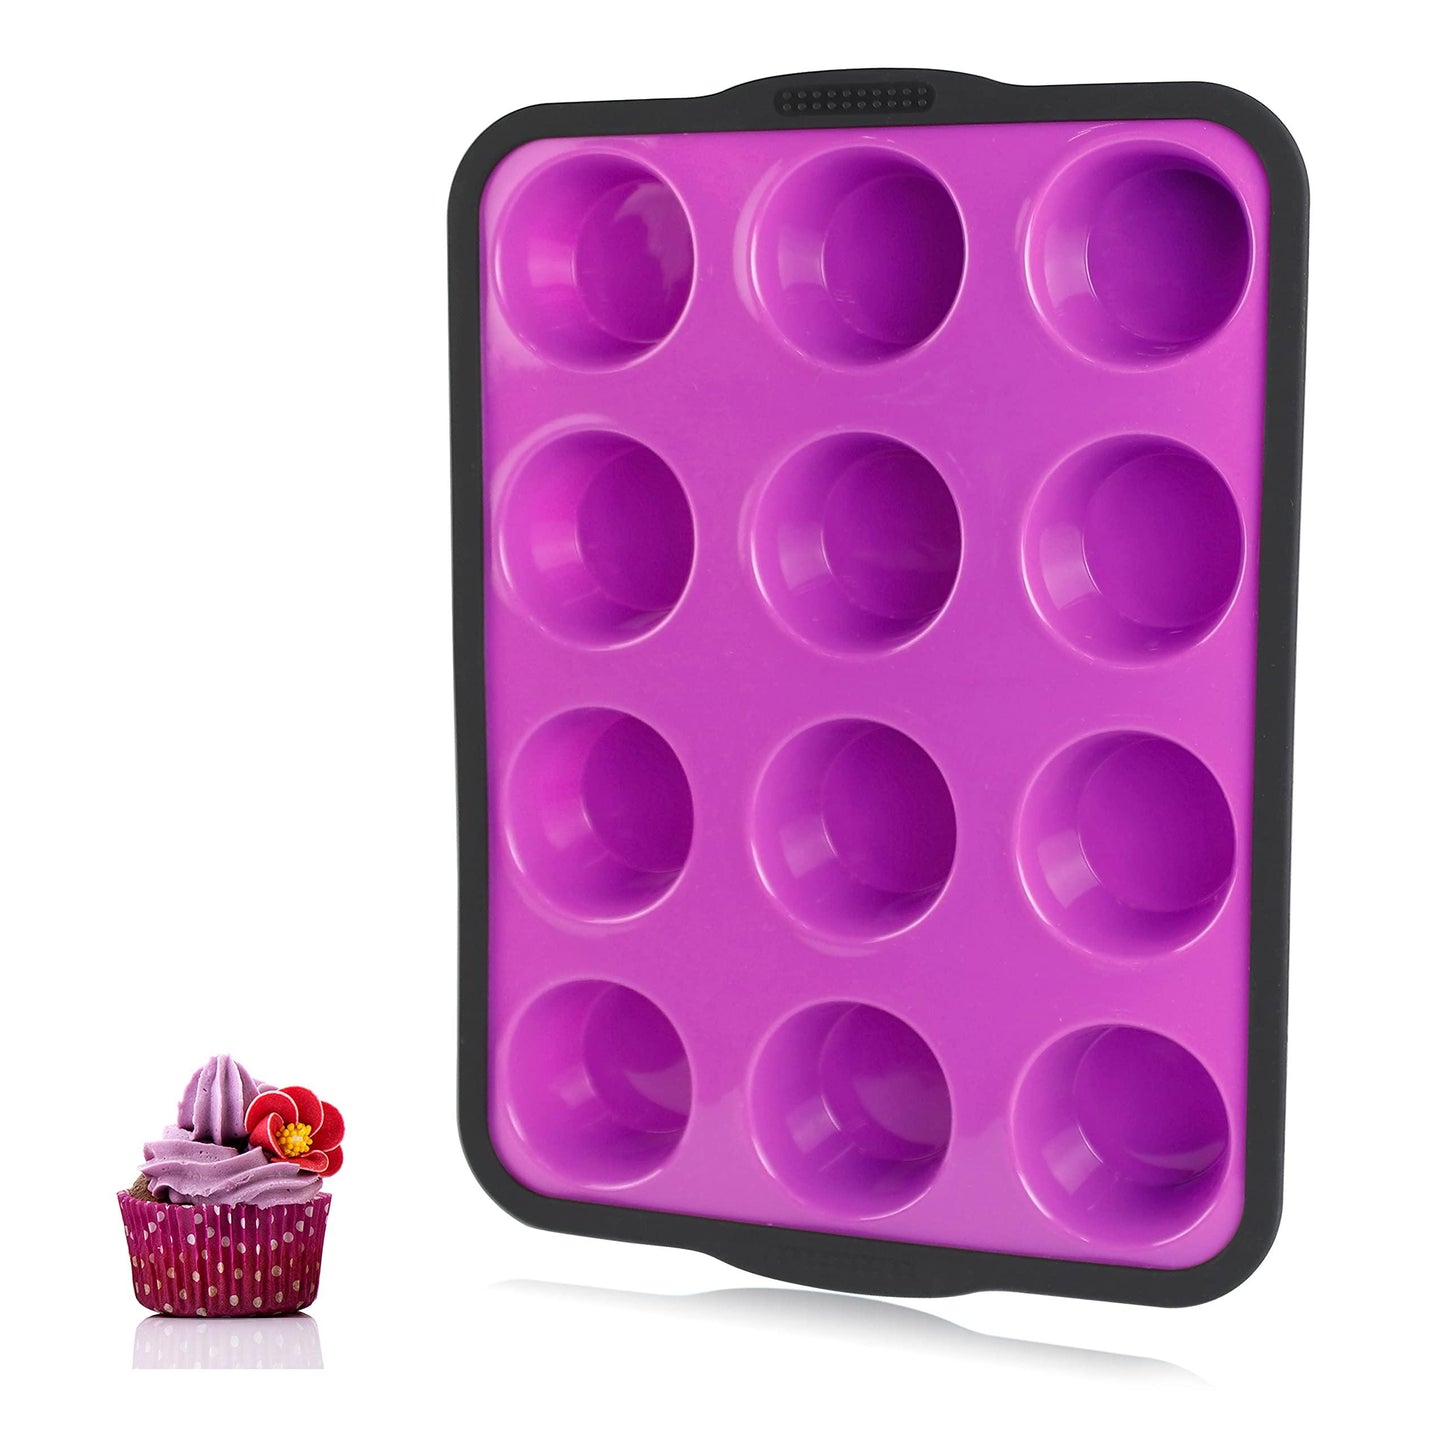 Aichoof Non-Stick Silicone Muffin Pan With Reinforced Stainless Steel Frame Inside,12 Cup Regular Muffin Baking Mold, 12 Cup Muffin Tin, BPA Free,Dishwasher Safe, Purple - CookCave